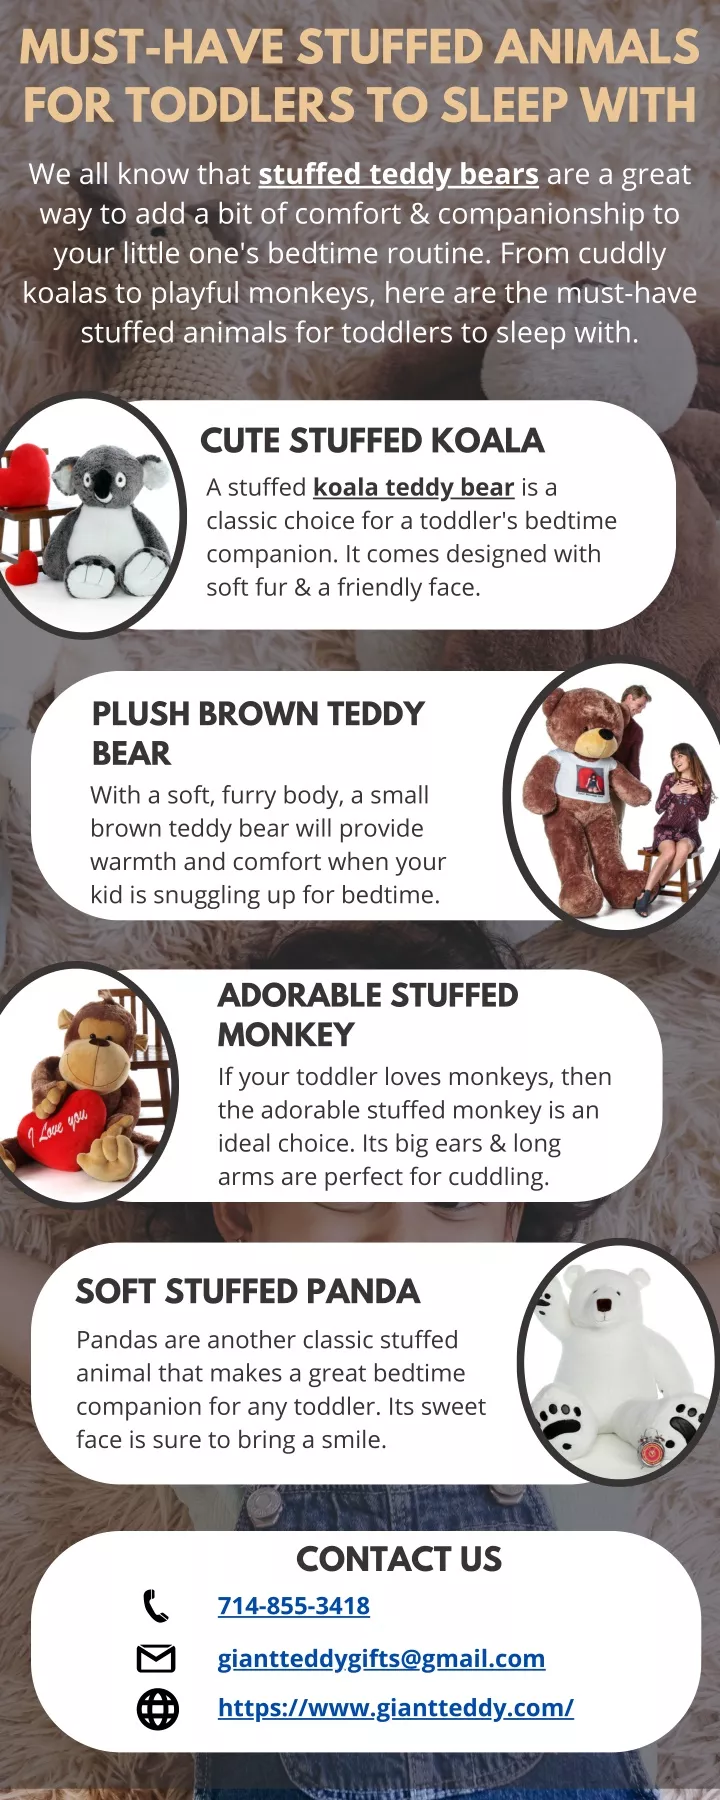 must have stuffed animals for toddlers to sleep